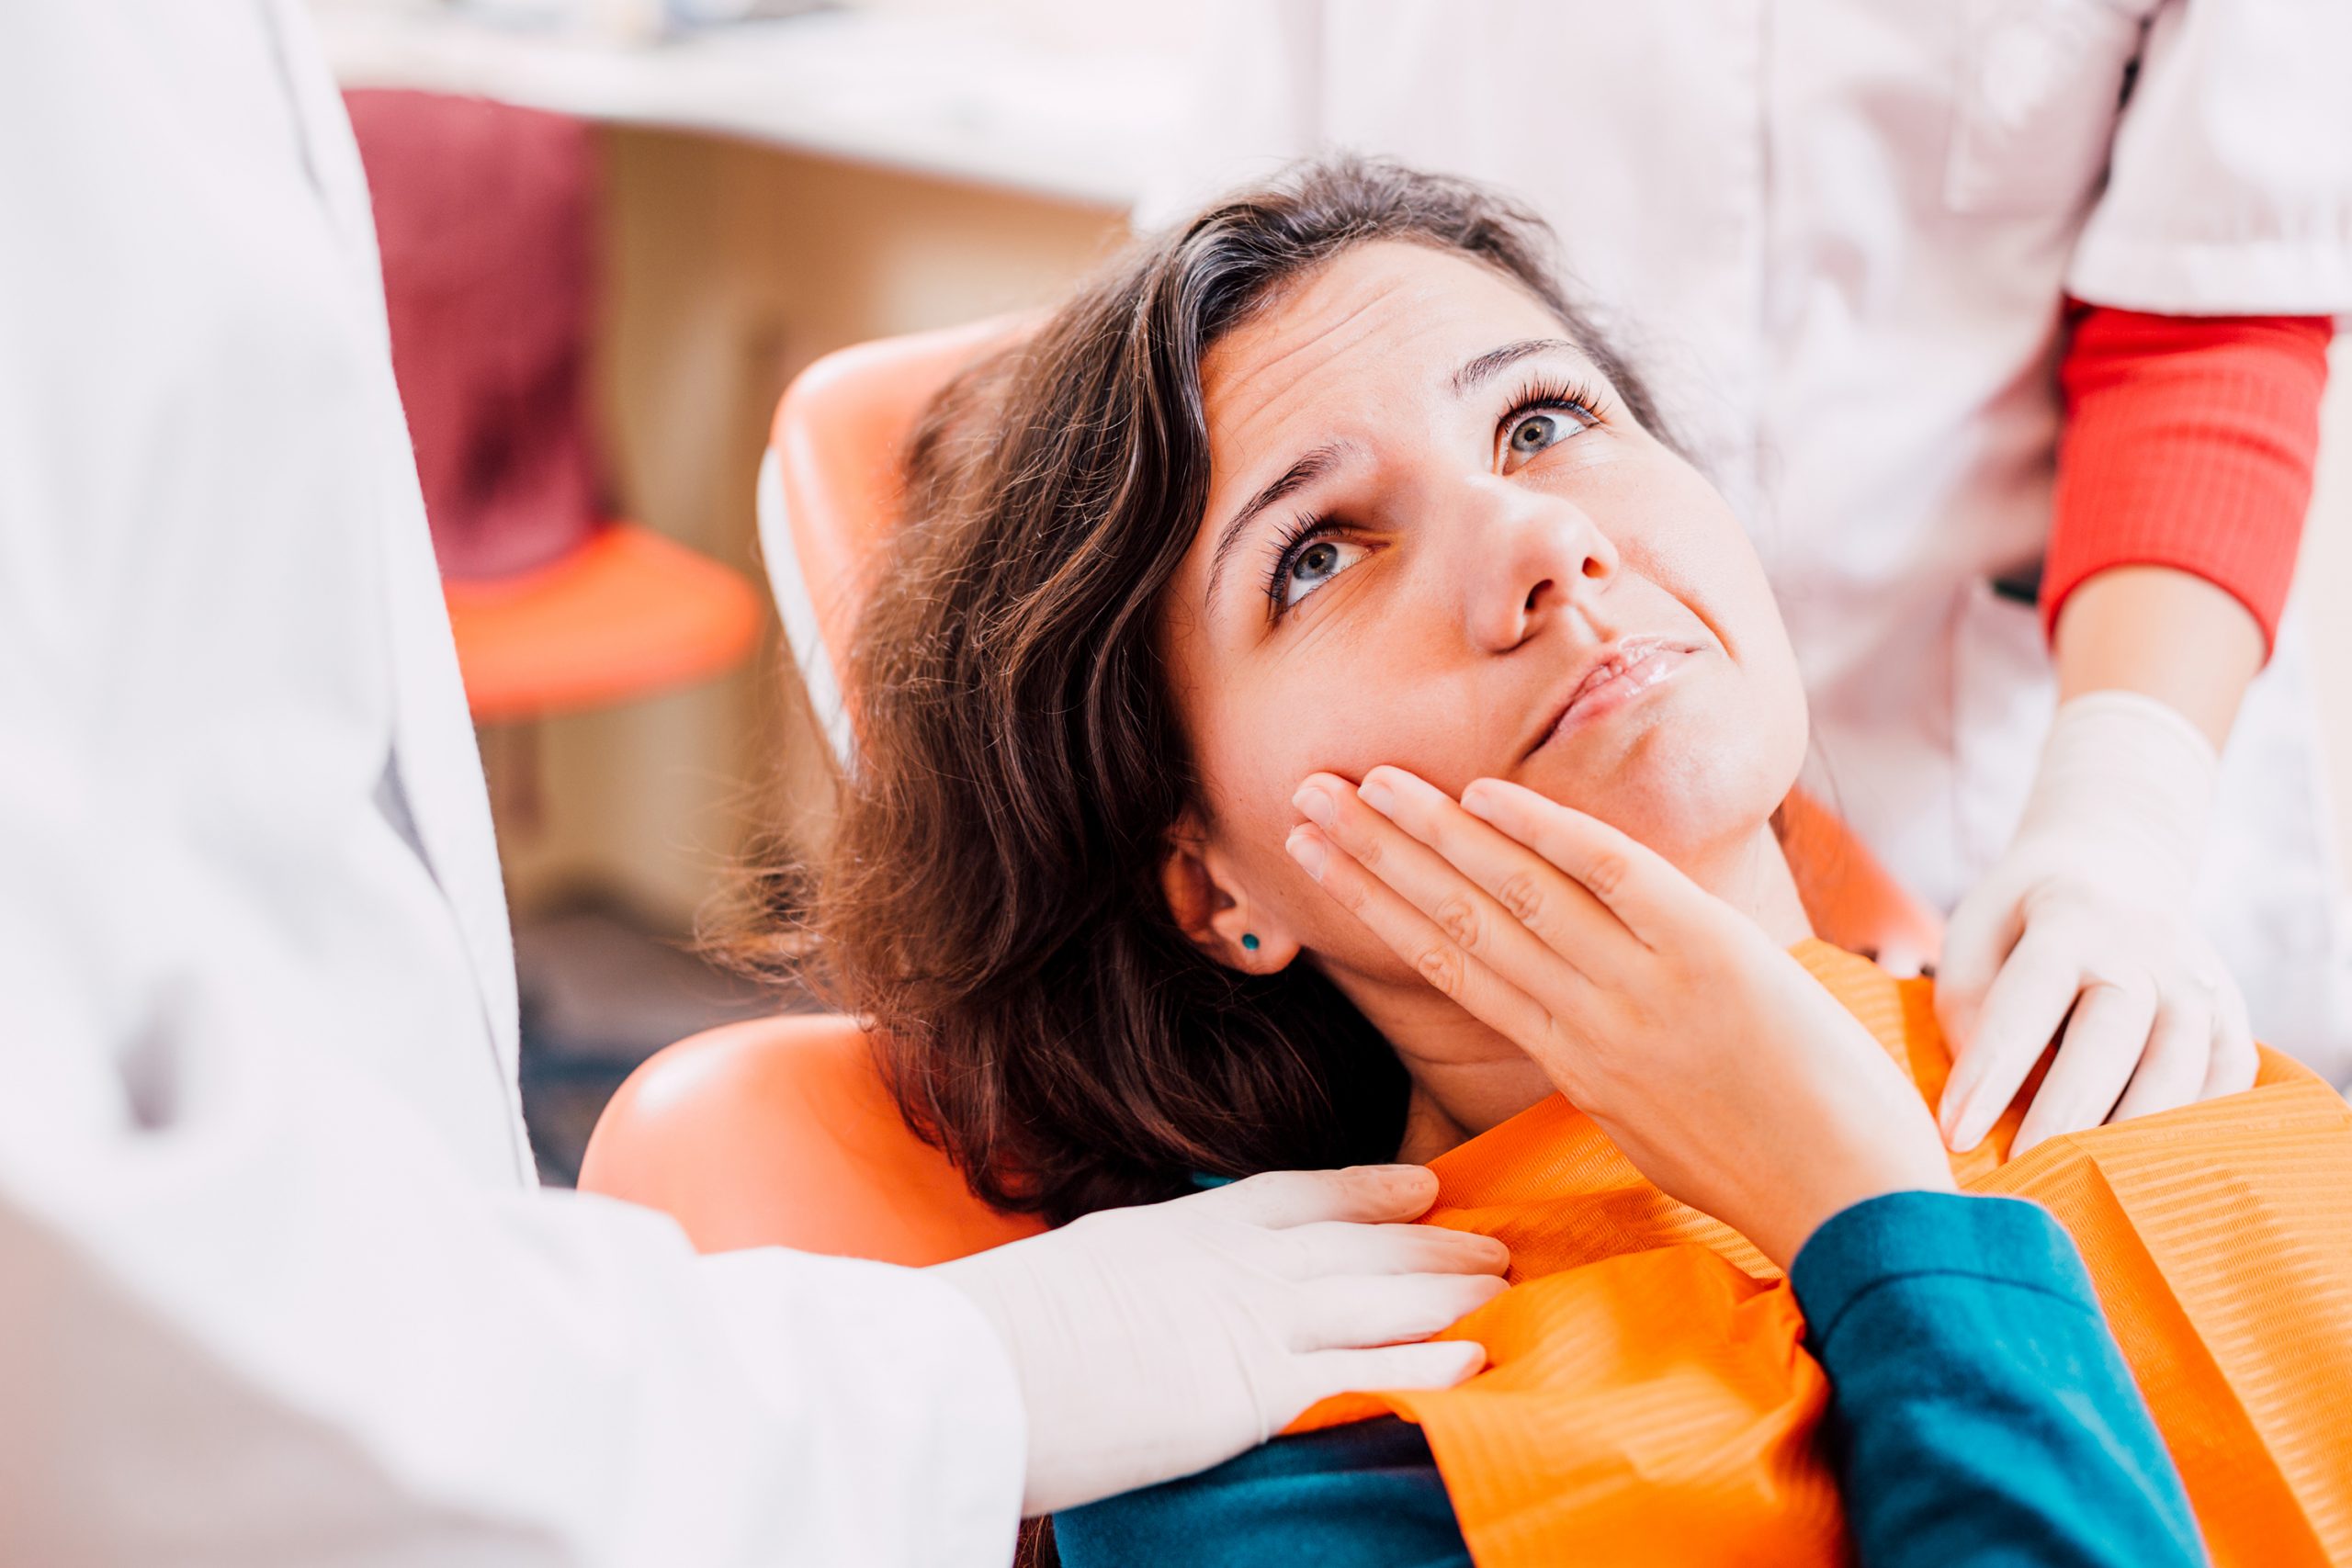 Patient with painful toothache siting in chair at dental office